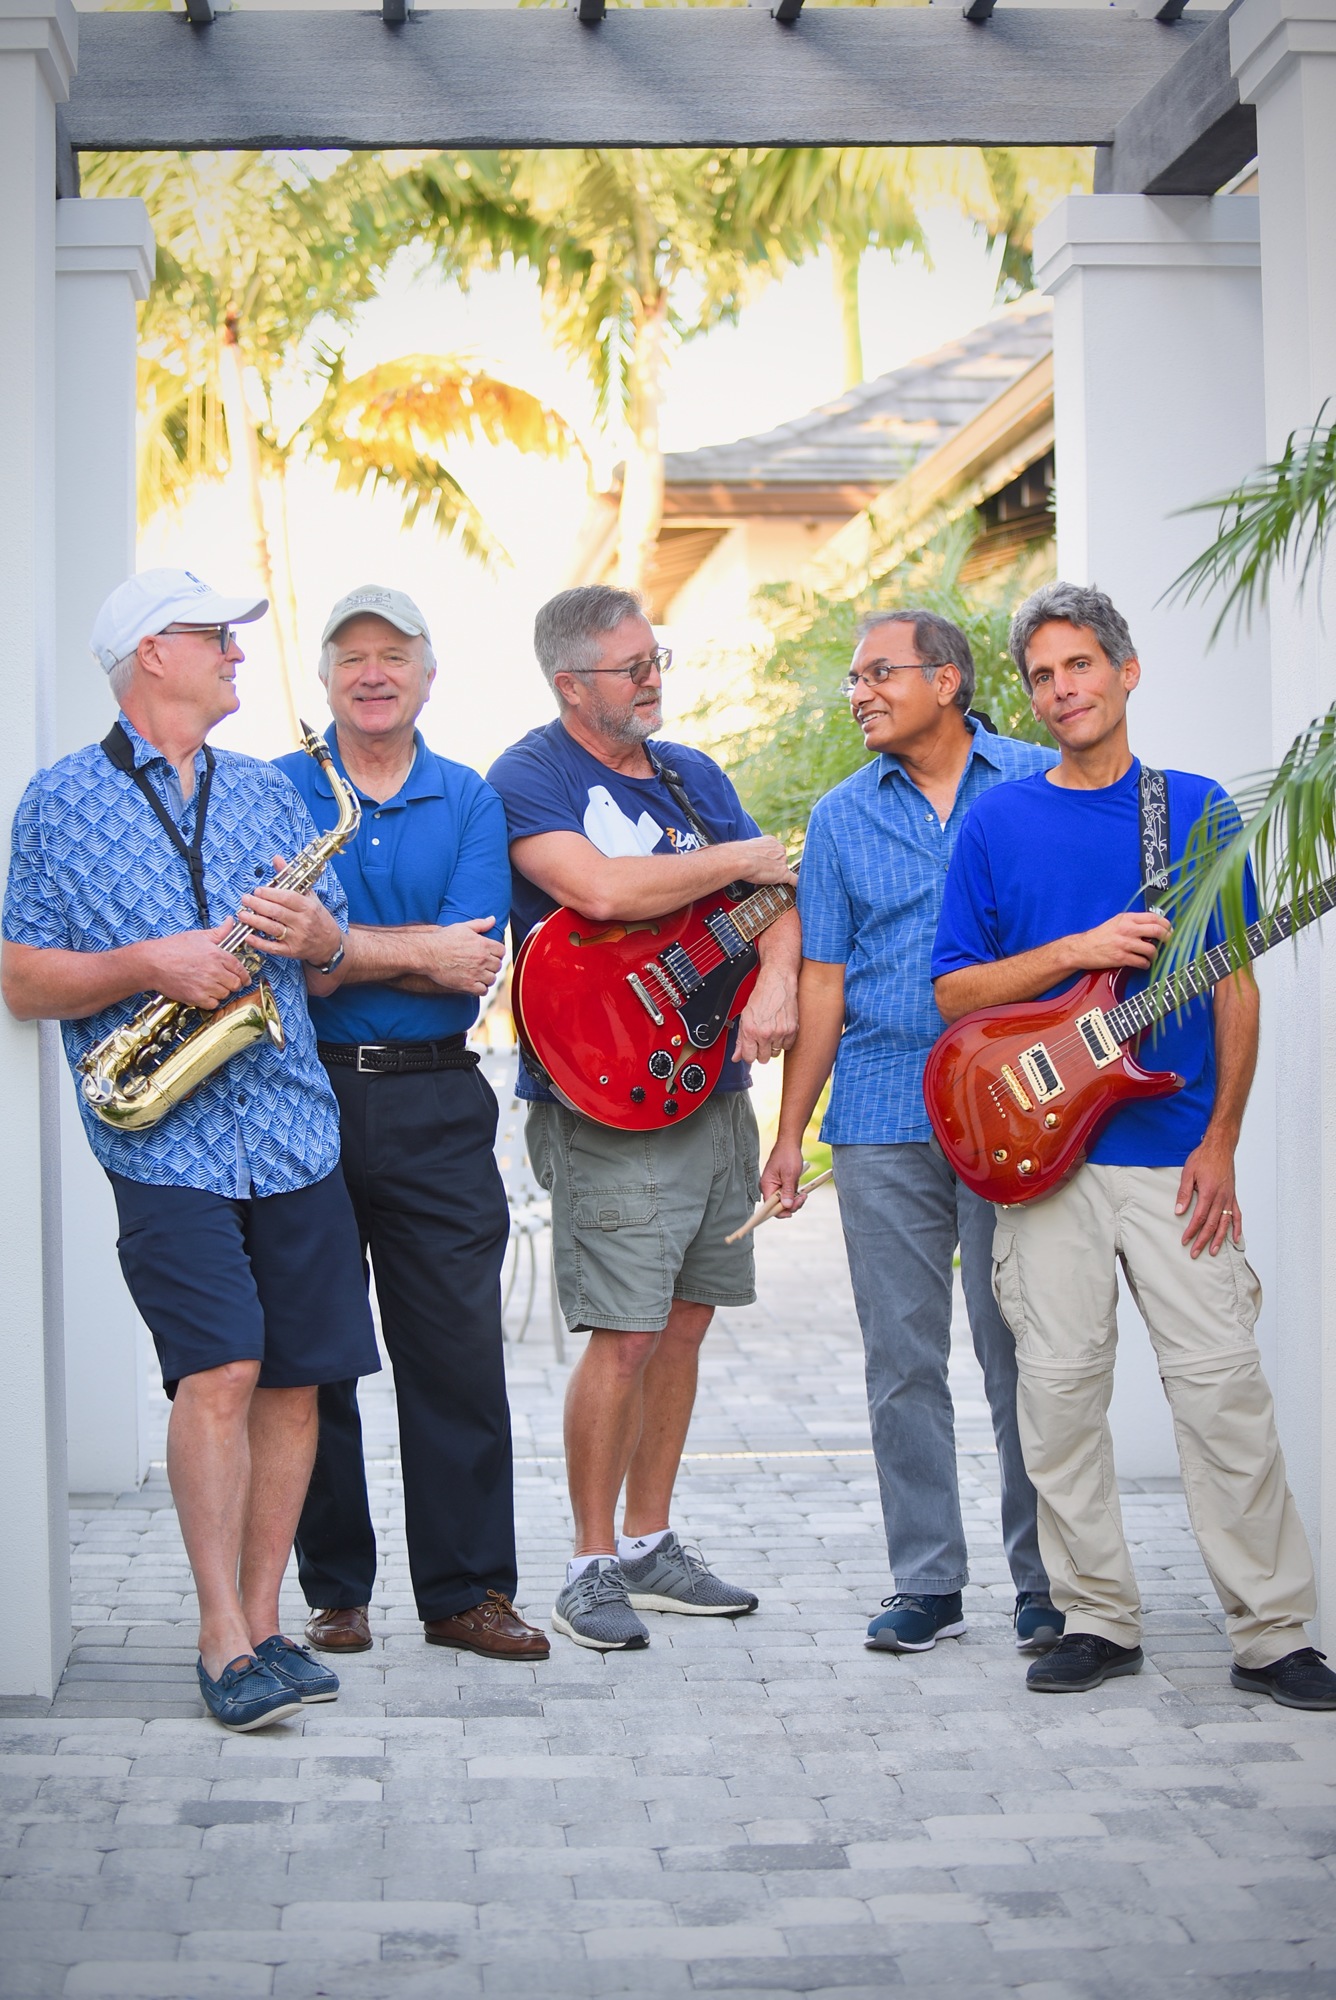 Birds of Play: The Blue Pelicans’ Ken Combs, Bob Sharak, Bill Irvan, Anil Warrier and Tom Perillo evolved from a loose two-man jam session into a full-blown cover band.